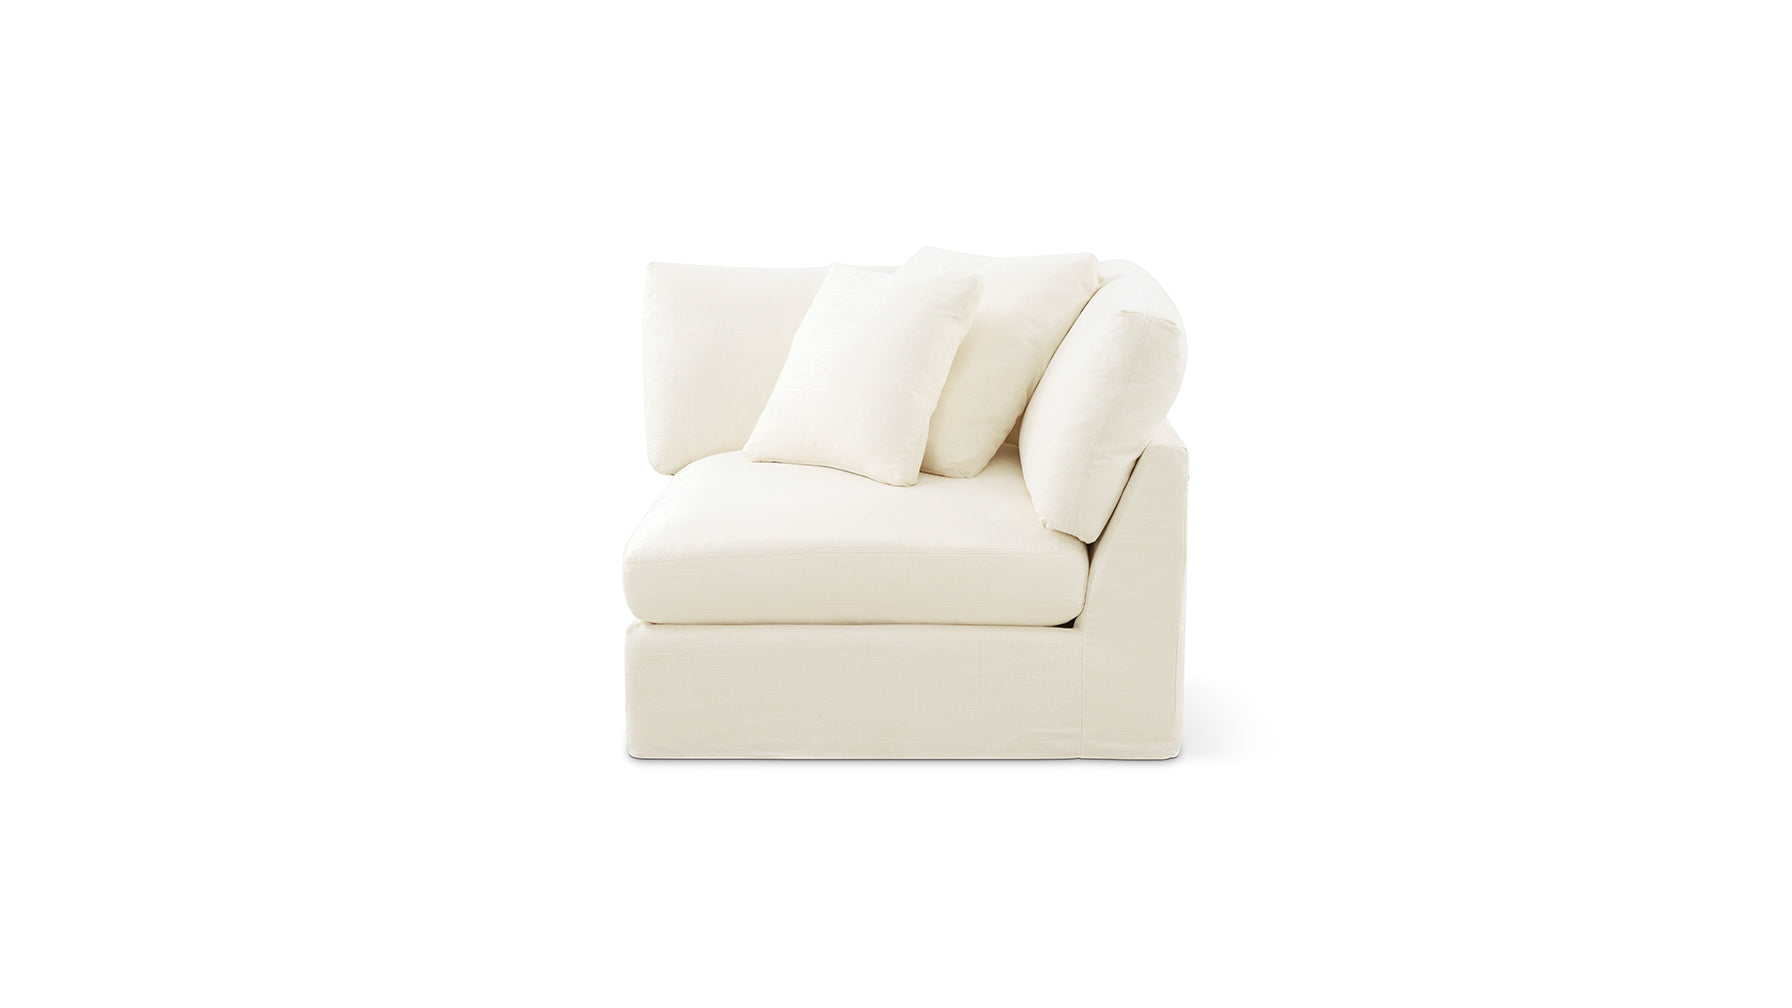 Slipcover - Get Together™ Corner Chair, Large, Cream Linen (Left Or Right) - Image 2